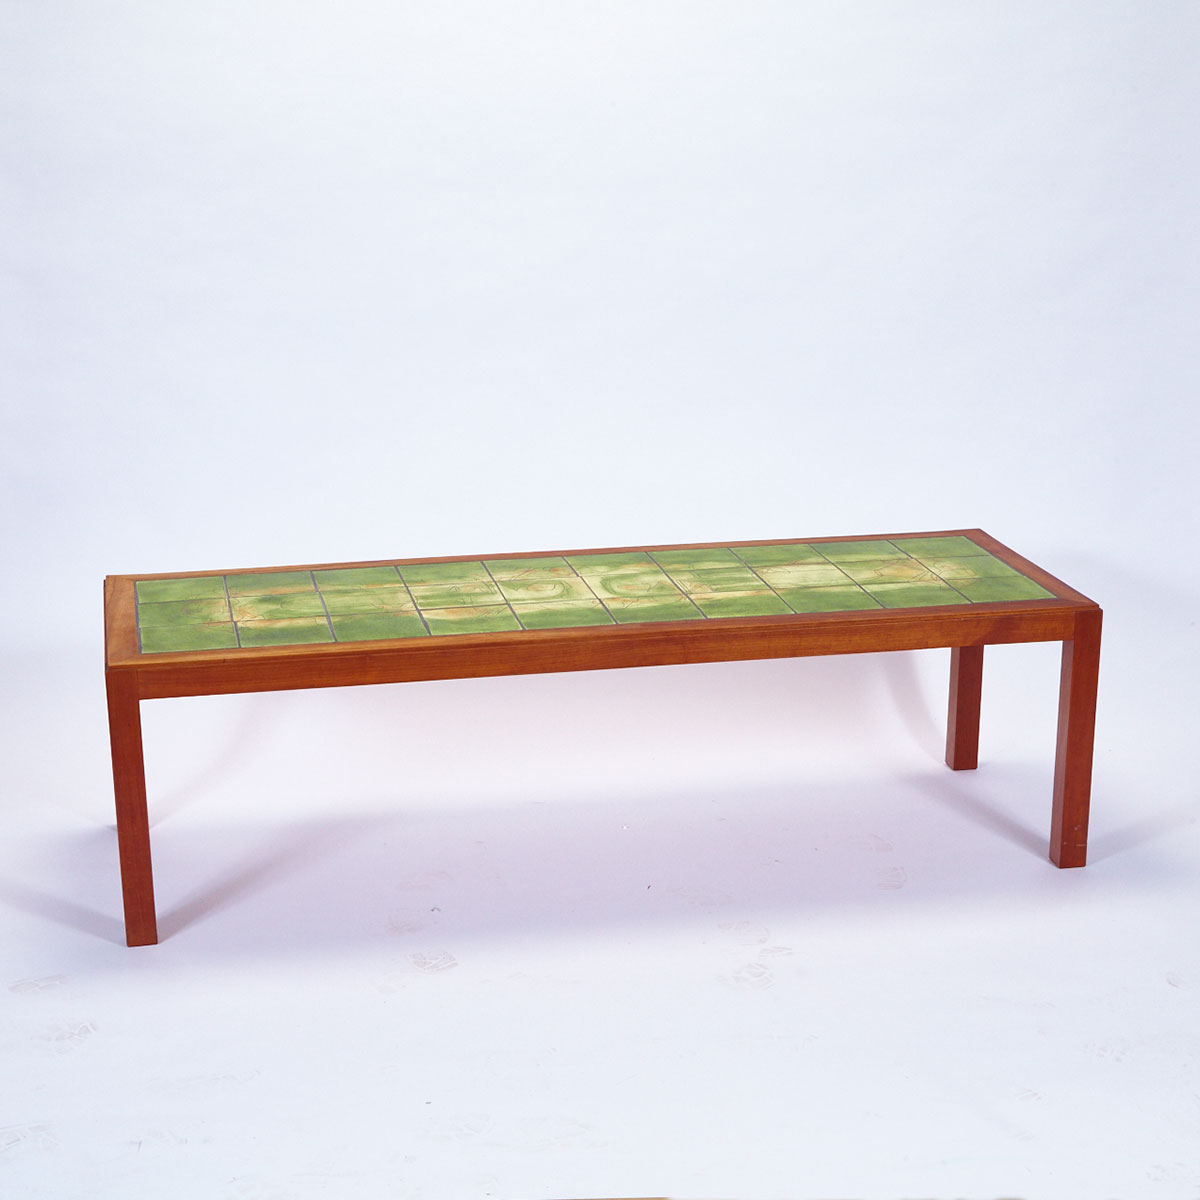 Brooklin Pottery Tile Topped Coffee Table, Theo, Susan and Ben Harlander, 1960s